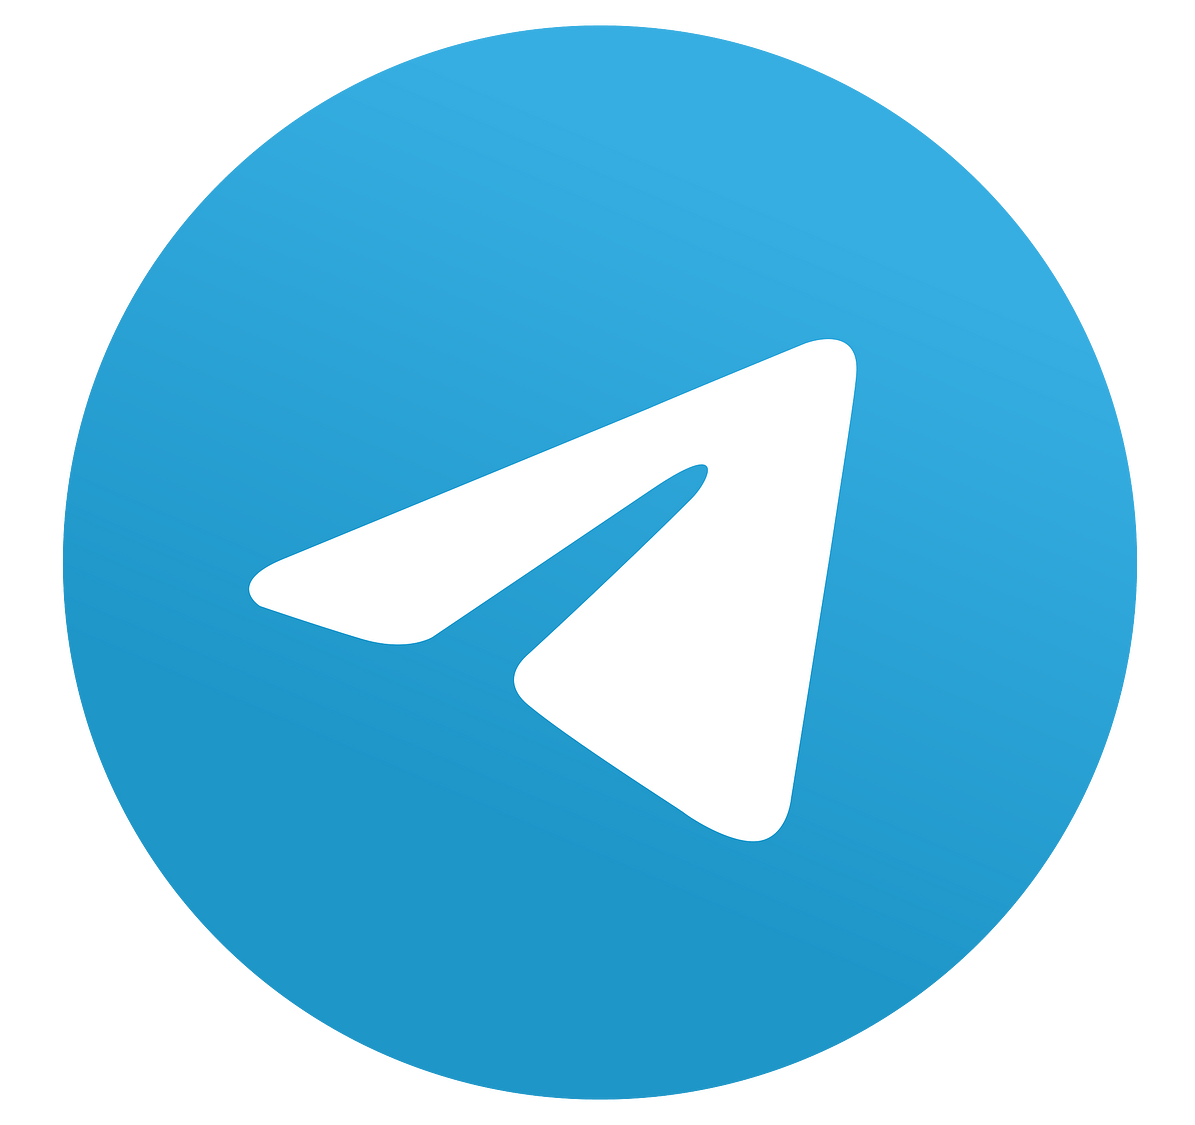 Subscribe to our Telegram Channel